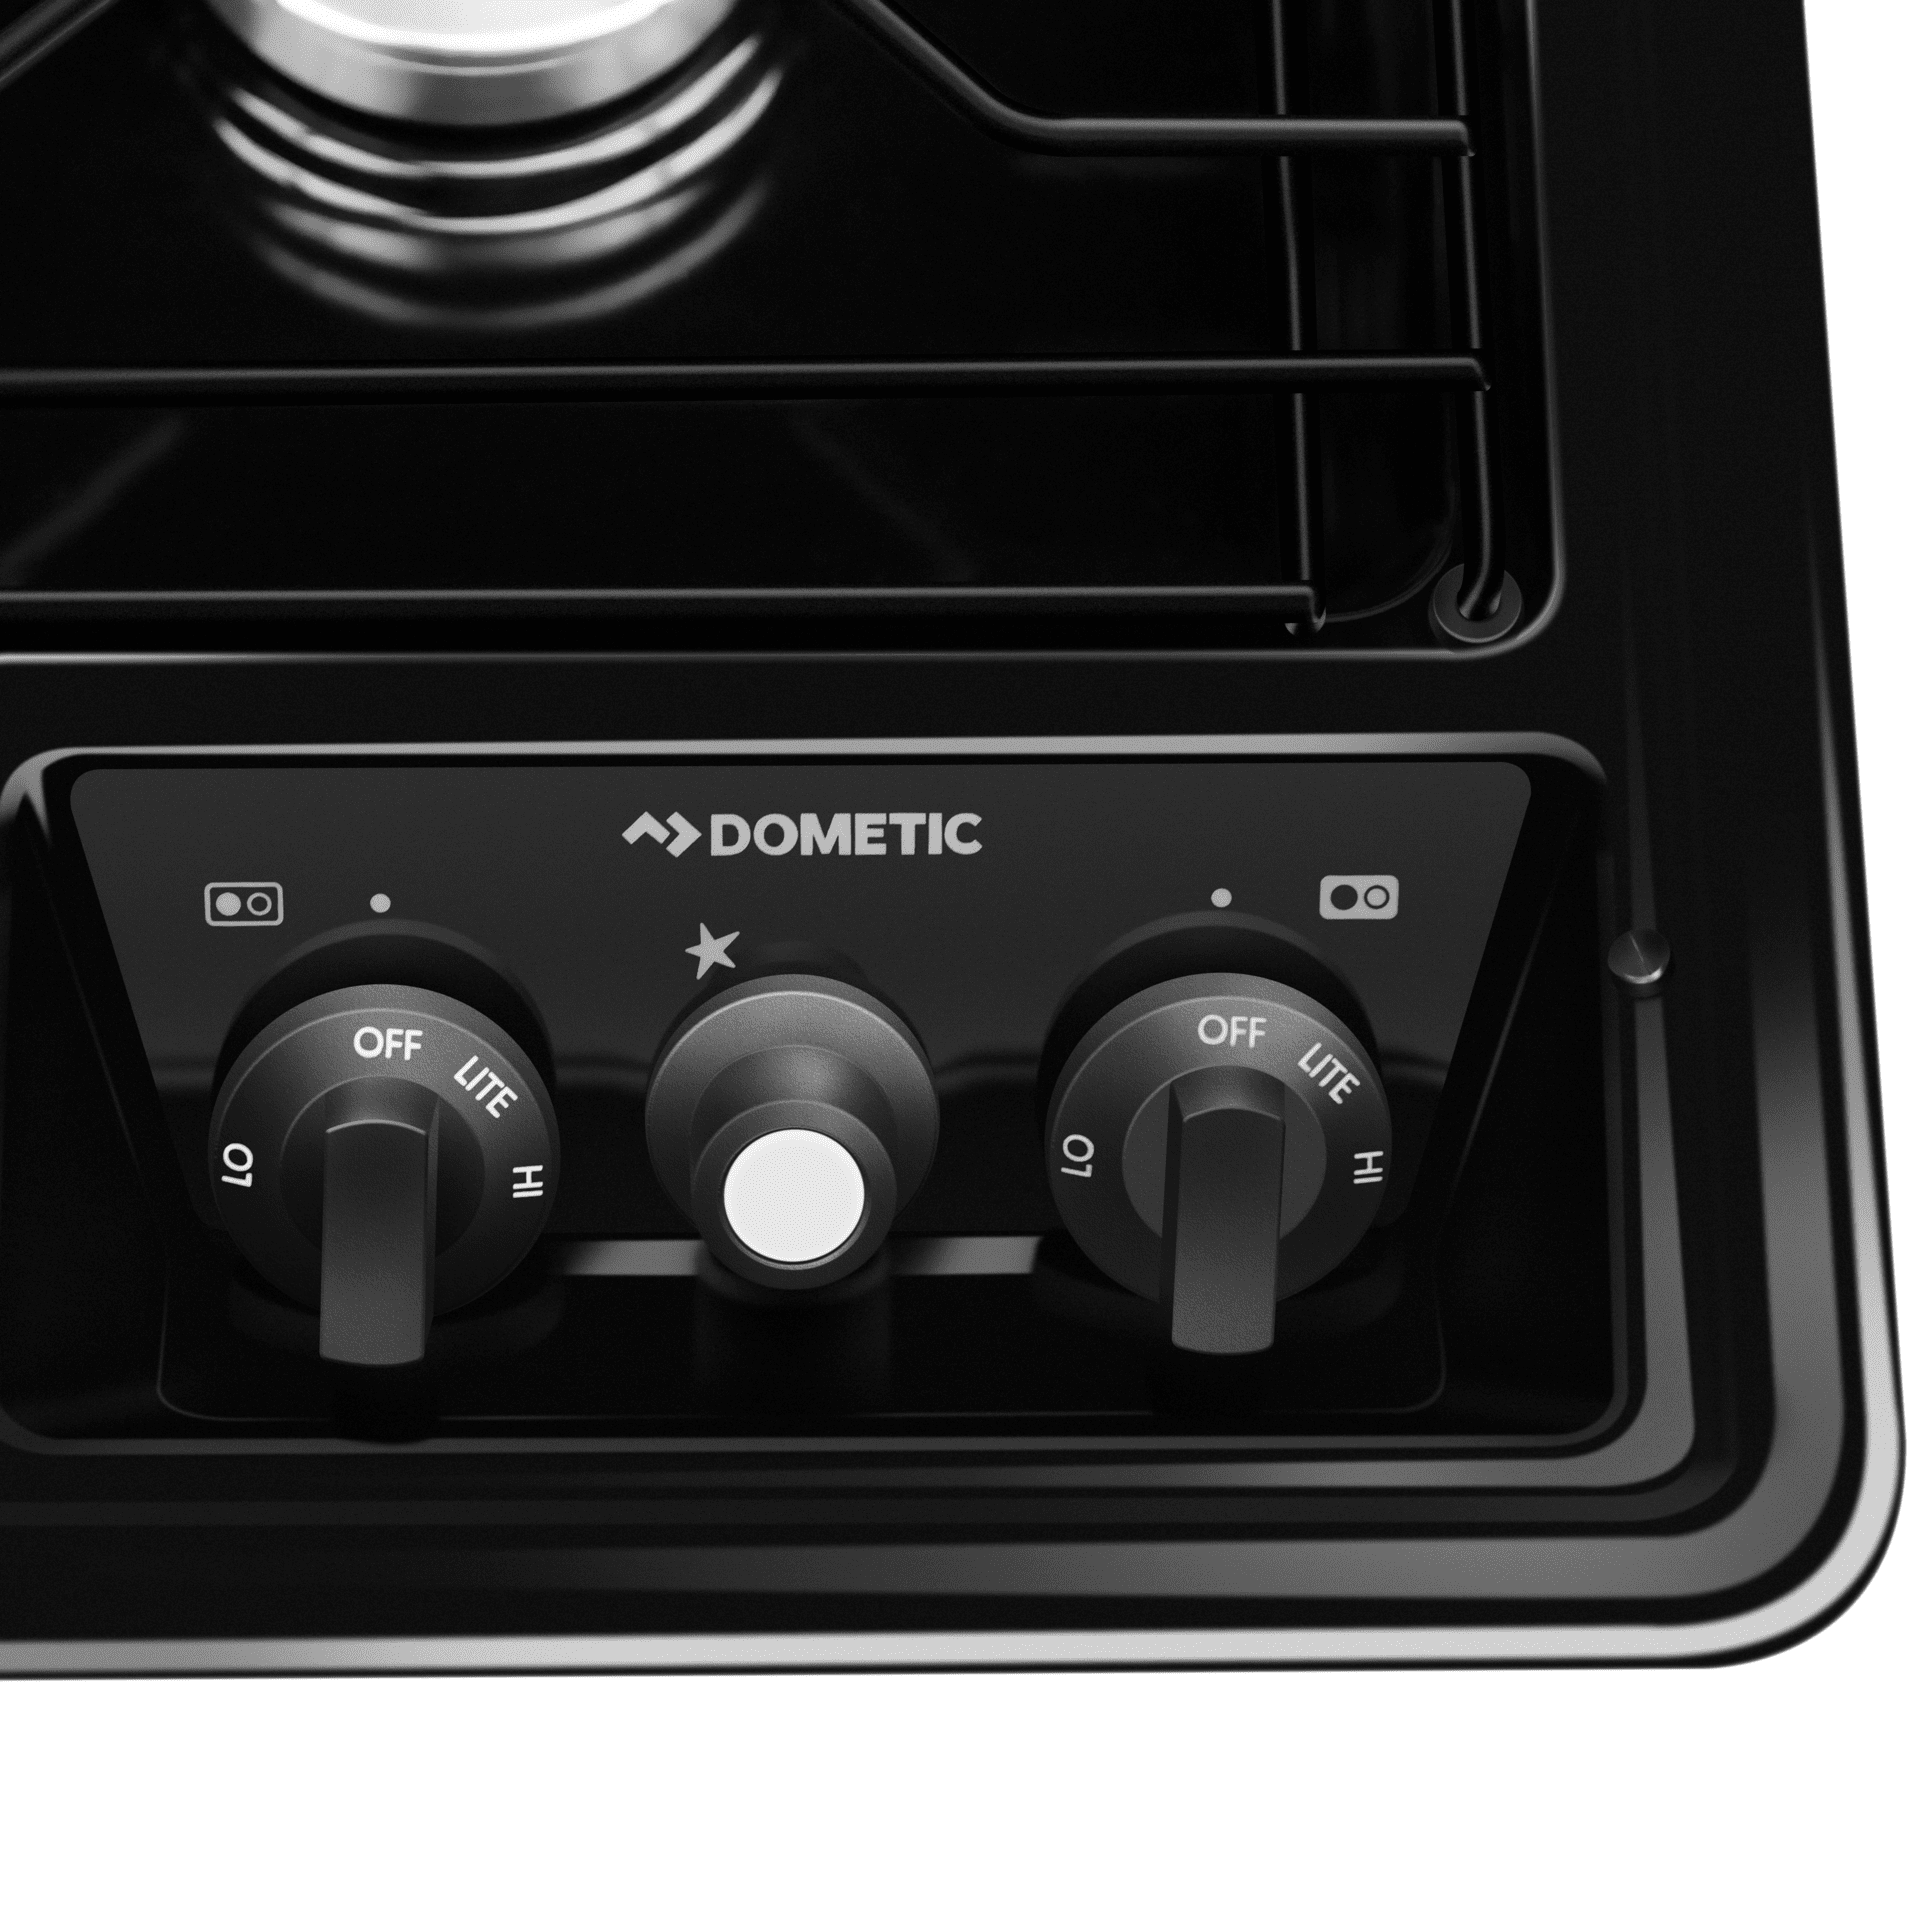 Dometic 21 Range - The Dometic 3 Burner Range has a centralized high  output burner and improved flame distribution